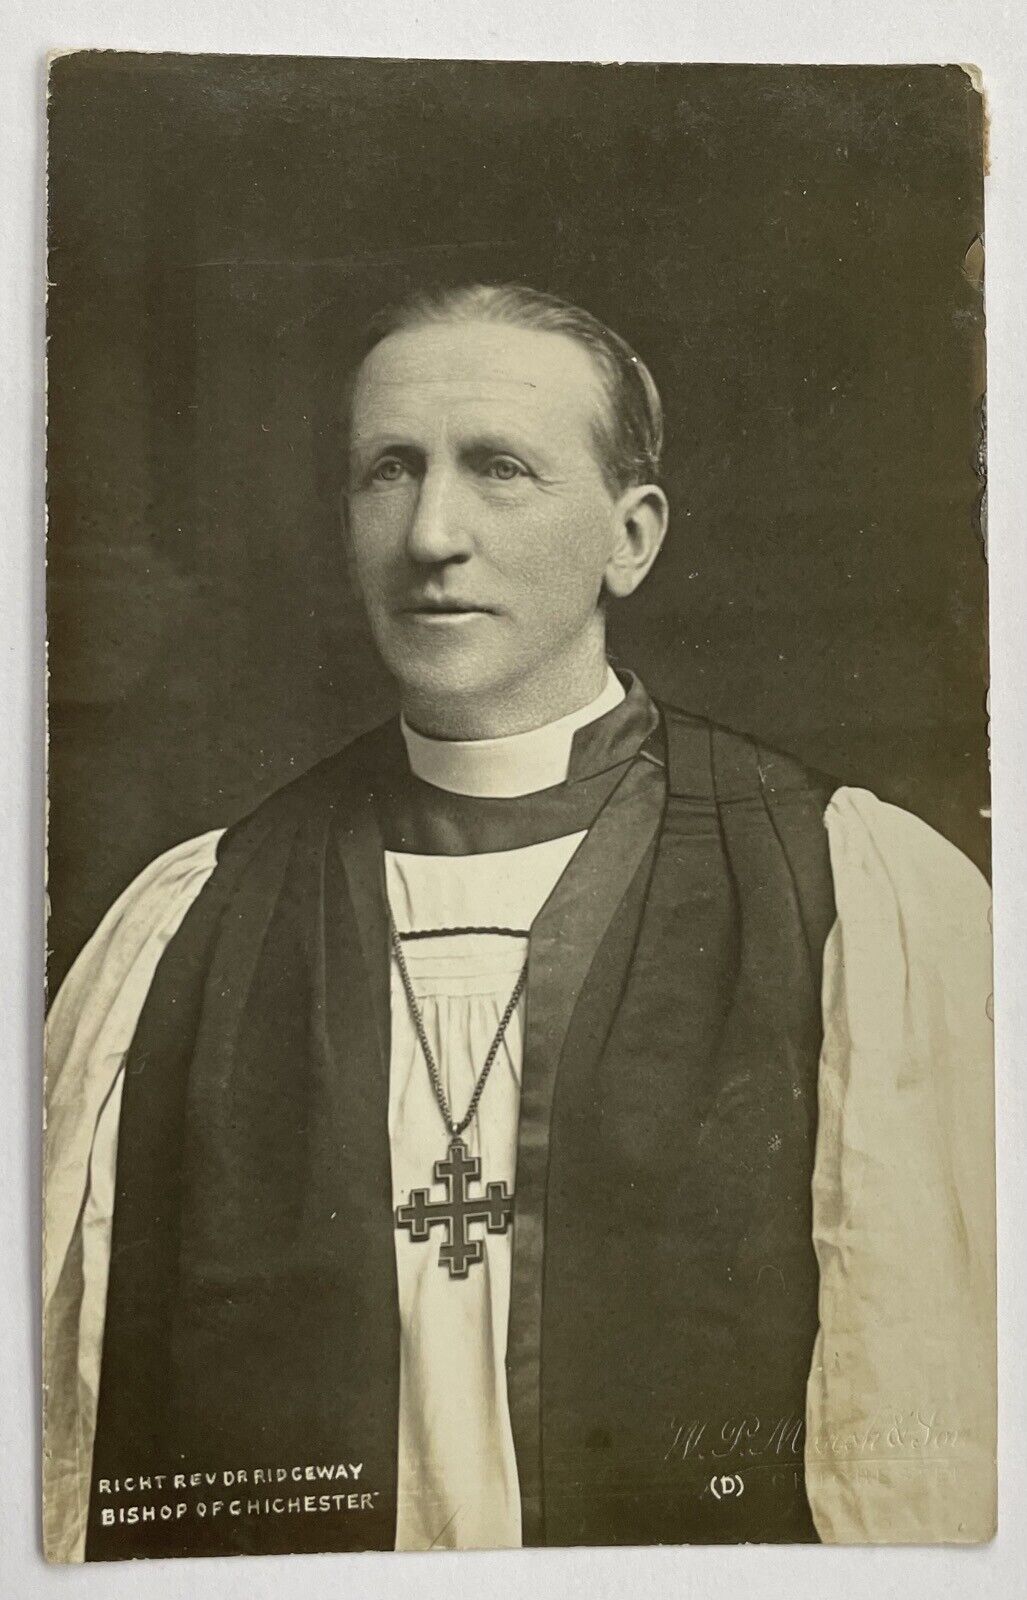 Right Rev. Dr. Ridgeway. Bishop Of Chichester. Real Photo Postcard.